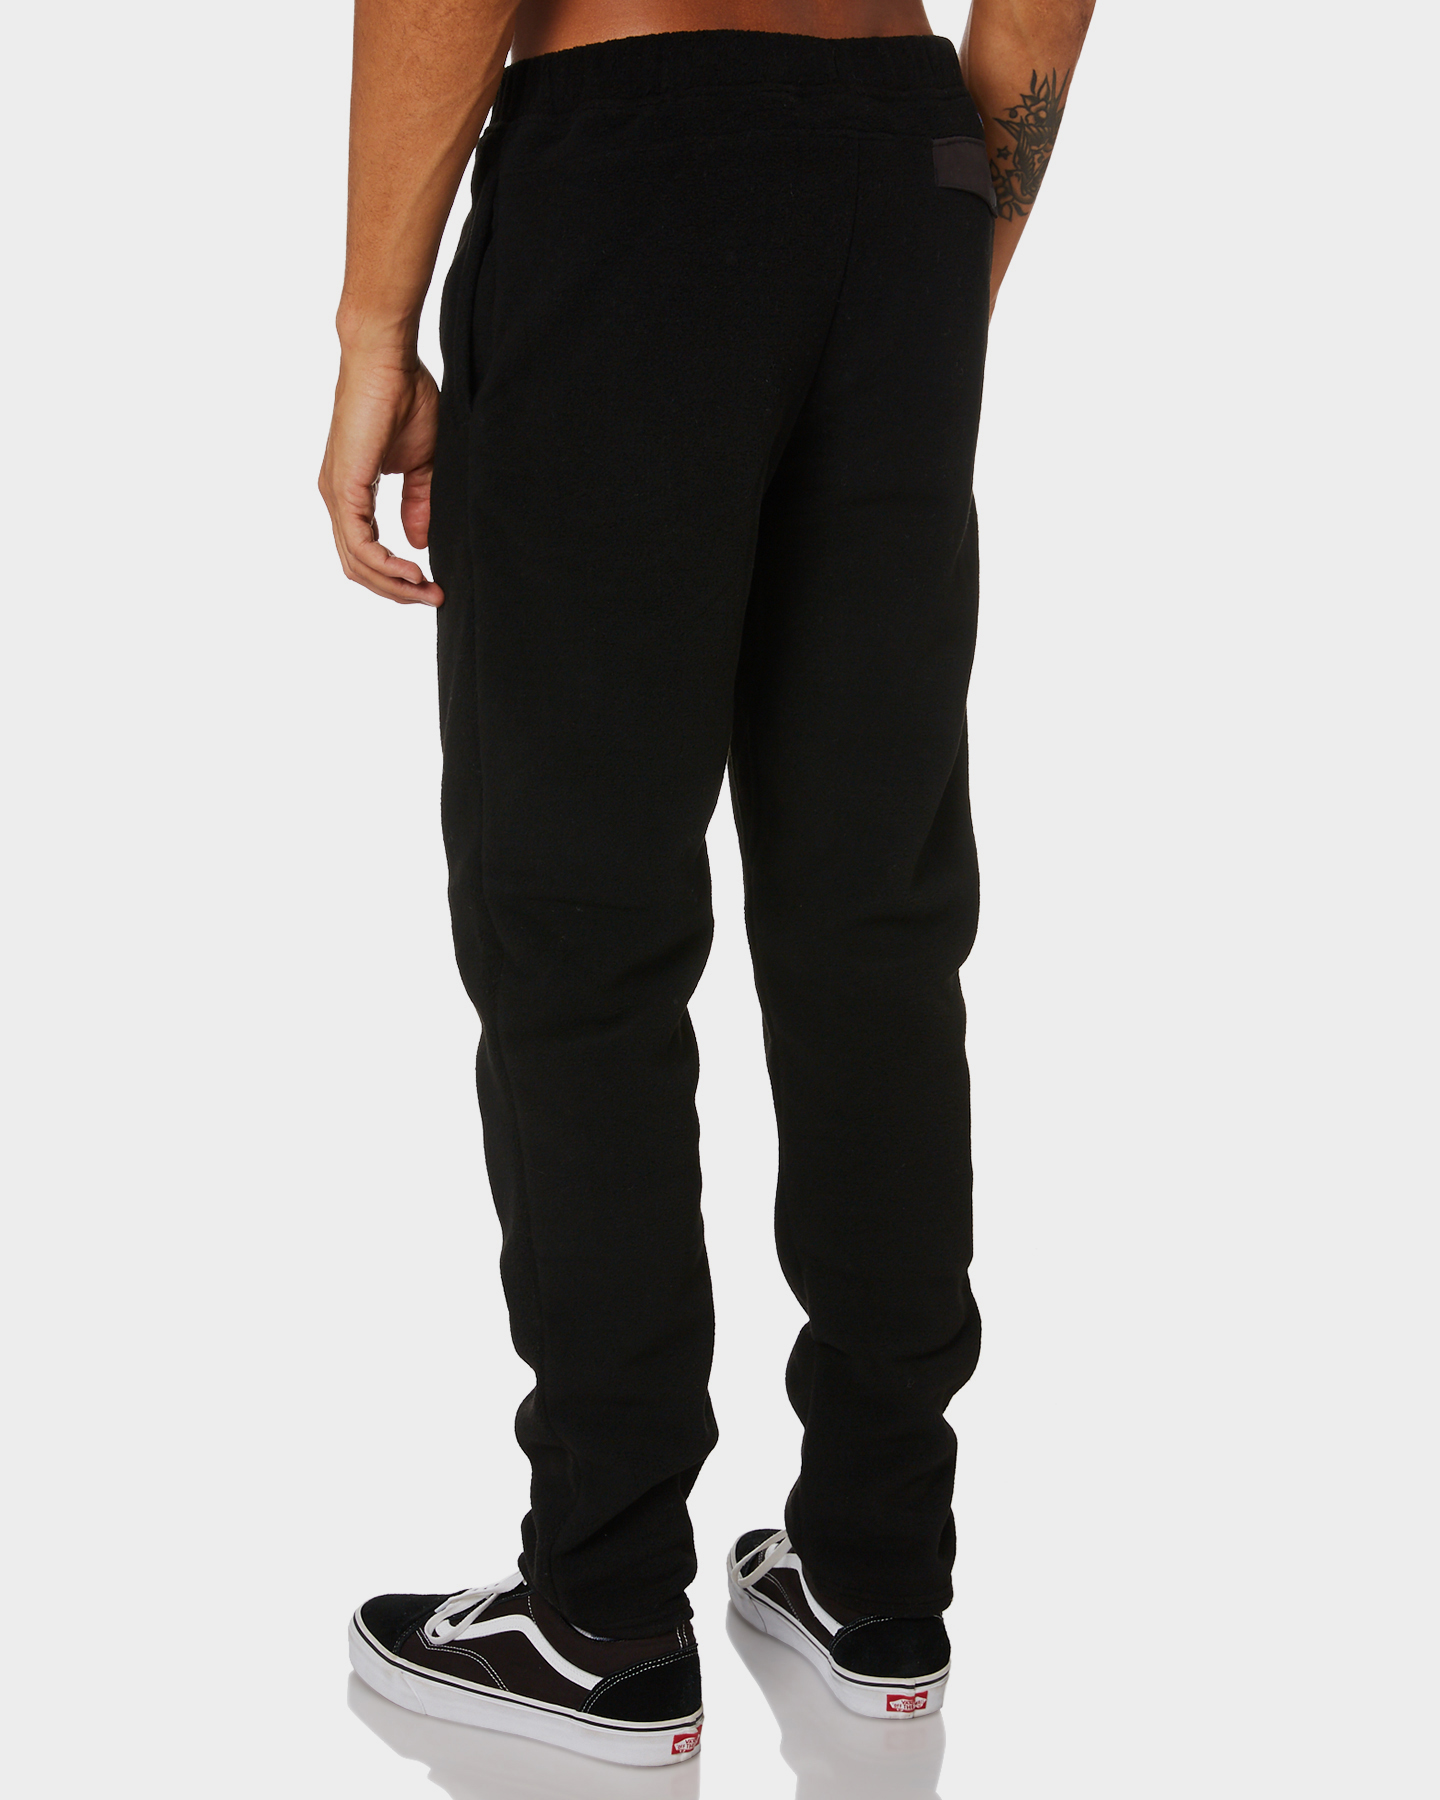 Patagonia Lightweight Synchilla Snap-T Mens Pants - Black | SurfStitch